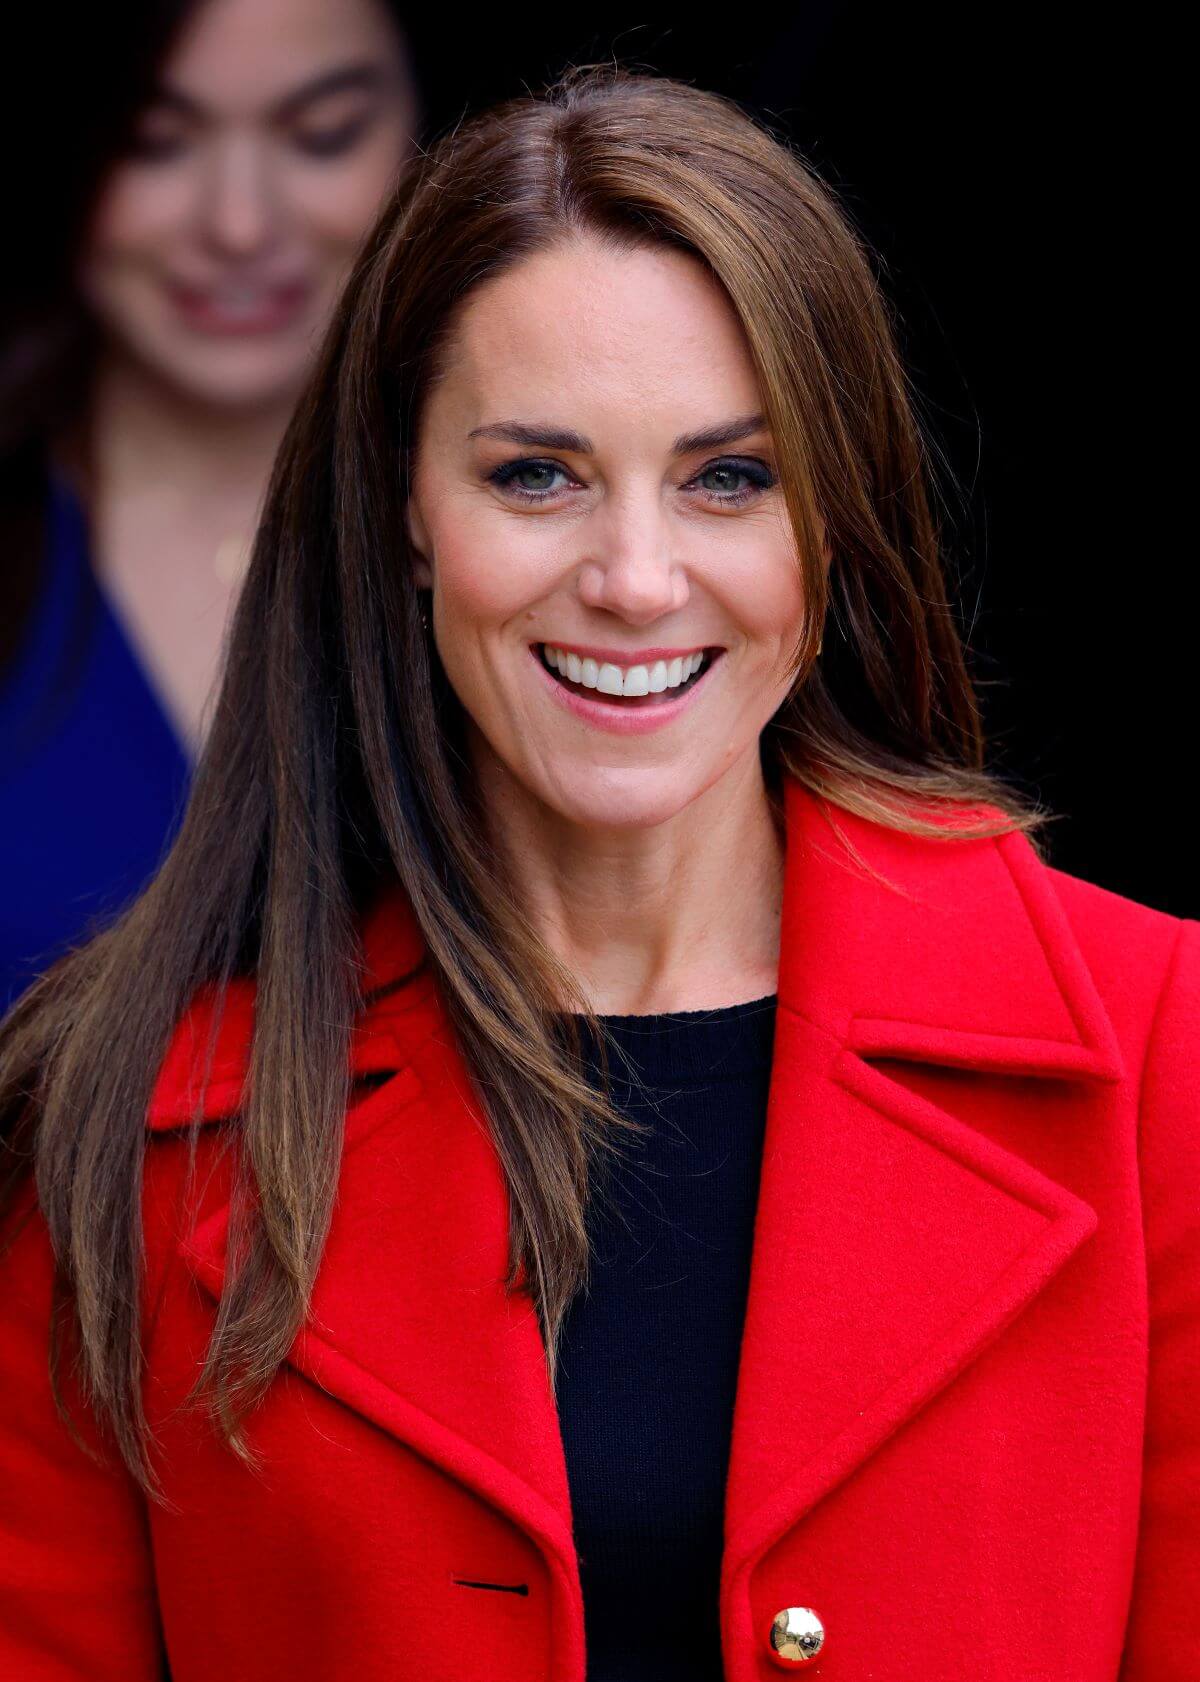 Kate Middleton visits St. Thomas Church in Wales